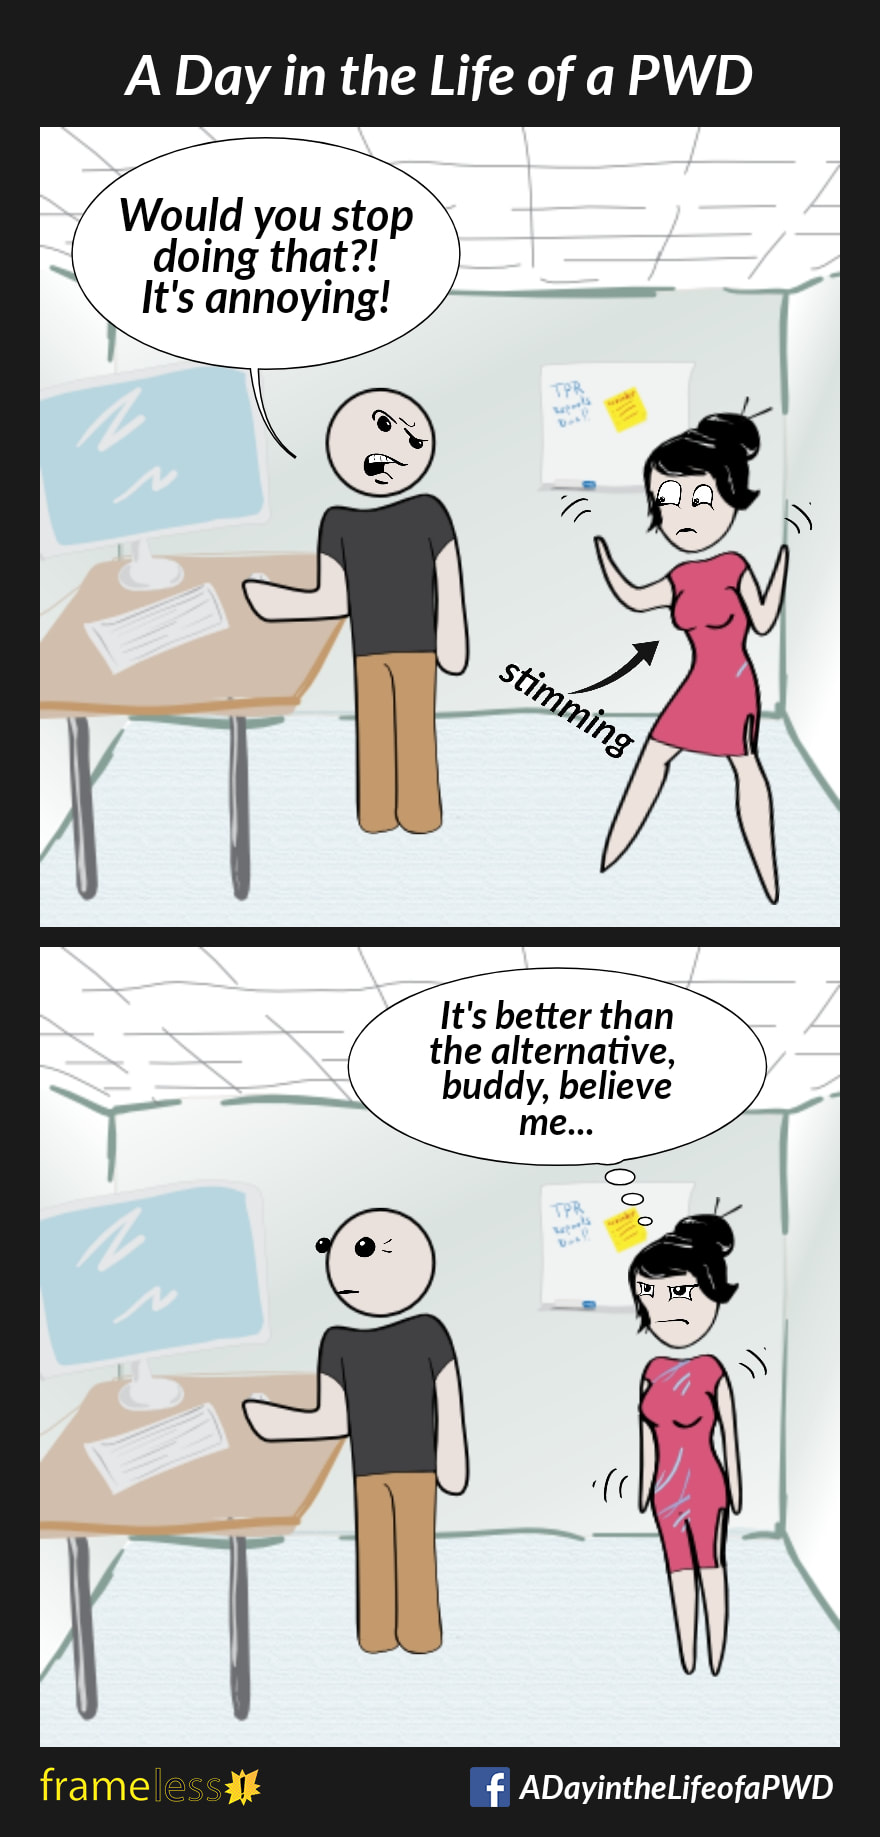 COMIC STRIP 
A Day in the Life of a PWD (Person With a Disability) 

Frame 1:
A woman and a man are in a classroom. The woman is stimming.
MAN: Would you stop doing that?! It's annoying!

Frame 2:
WOMAN (thinking): It's better than the alternative, buddy, believe me... 